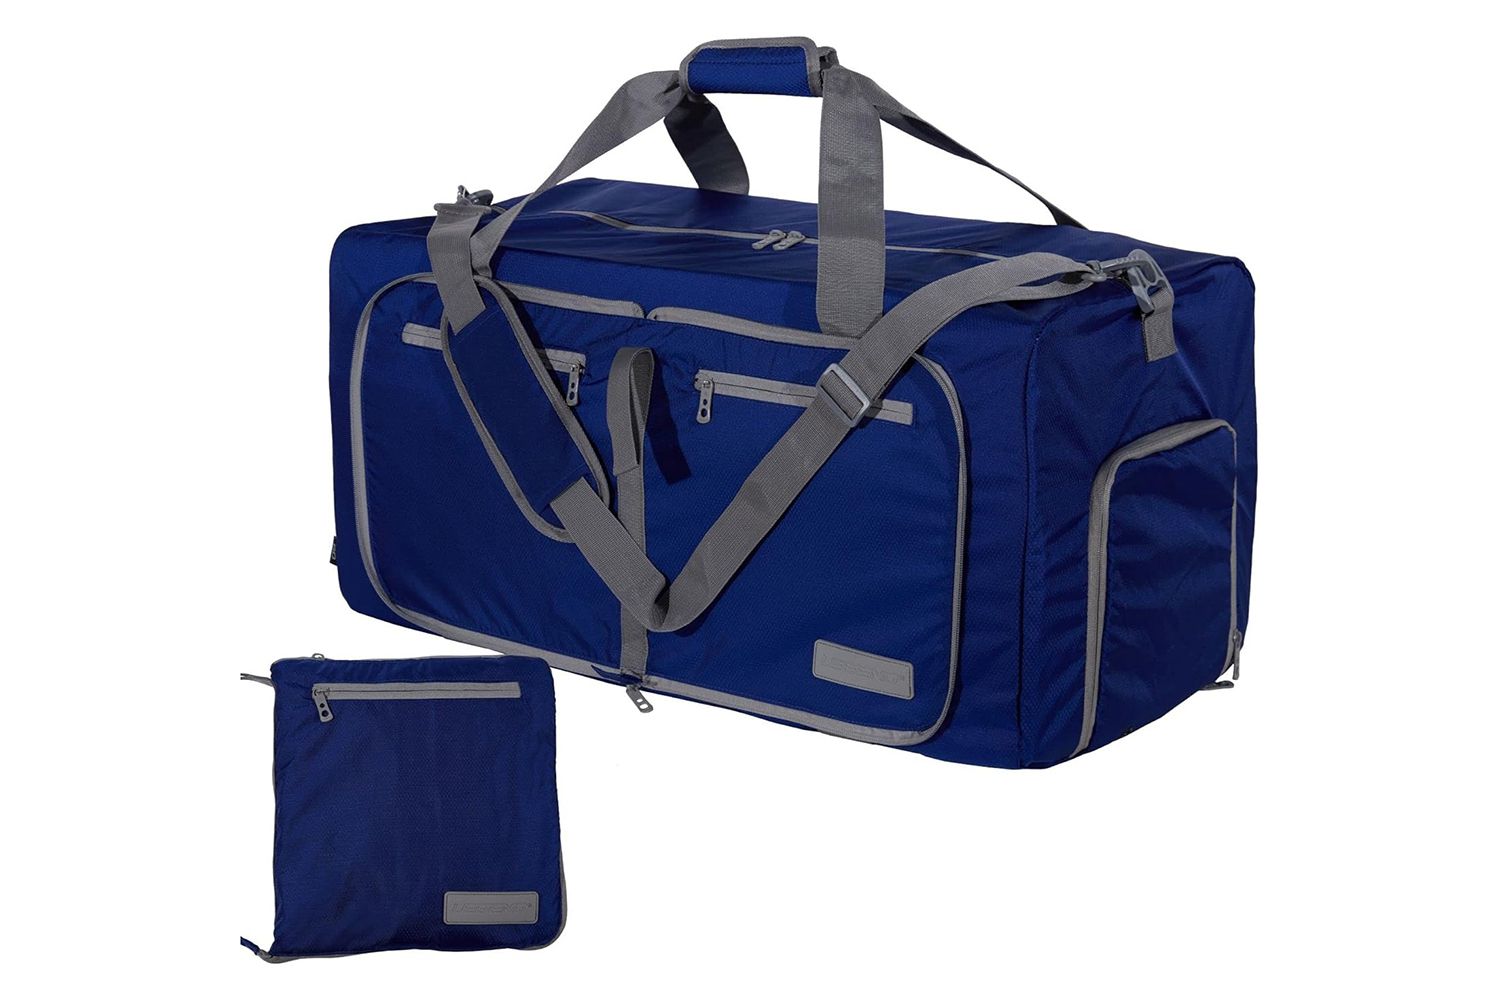 LEGEND Foldable Duffle Bag for Travel - Lightweight Carry On Duffel Bag with Pockets & Straps - Ideal for Sleepover, Weekend Getaways & Weekender Bag, Versatile Travel Duffel Bags (80L, Royal Blue)